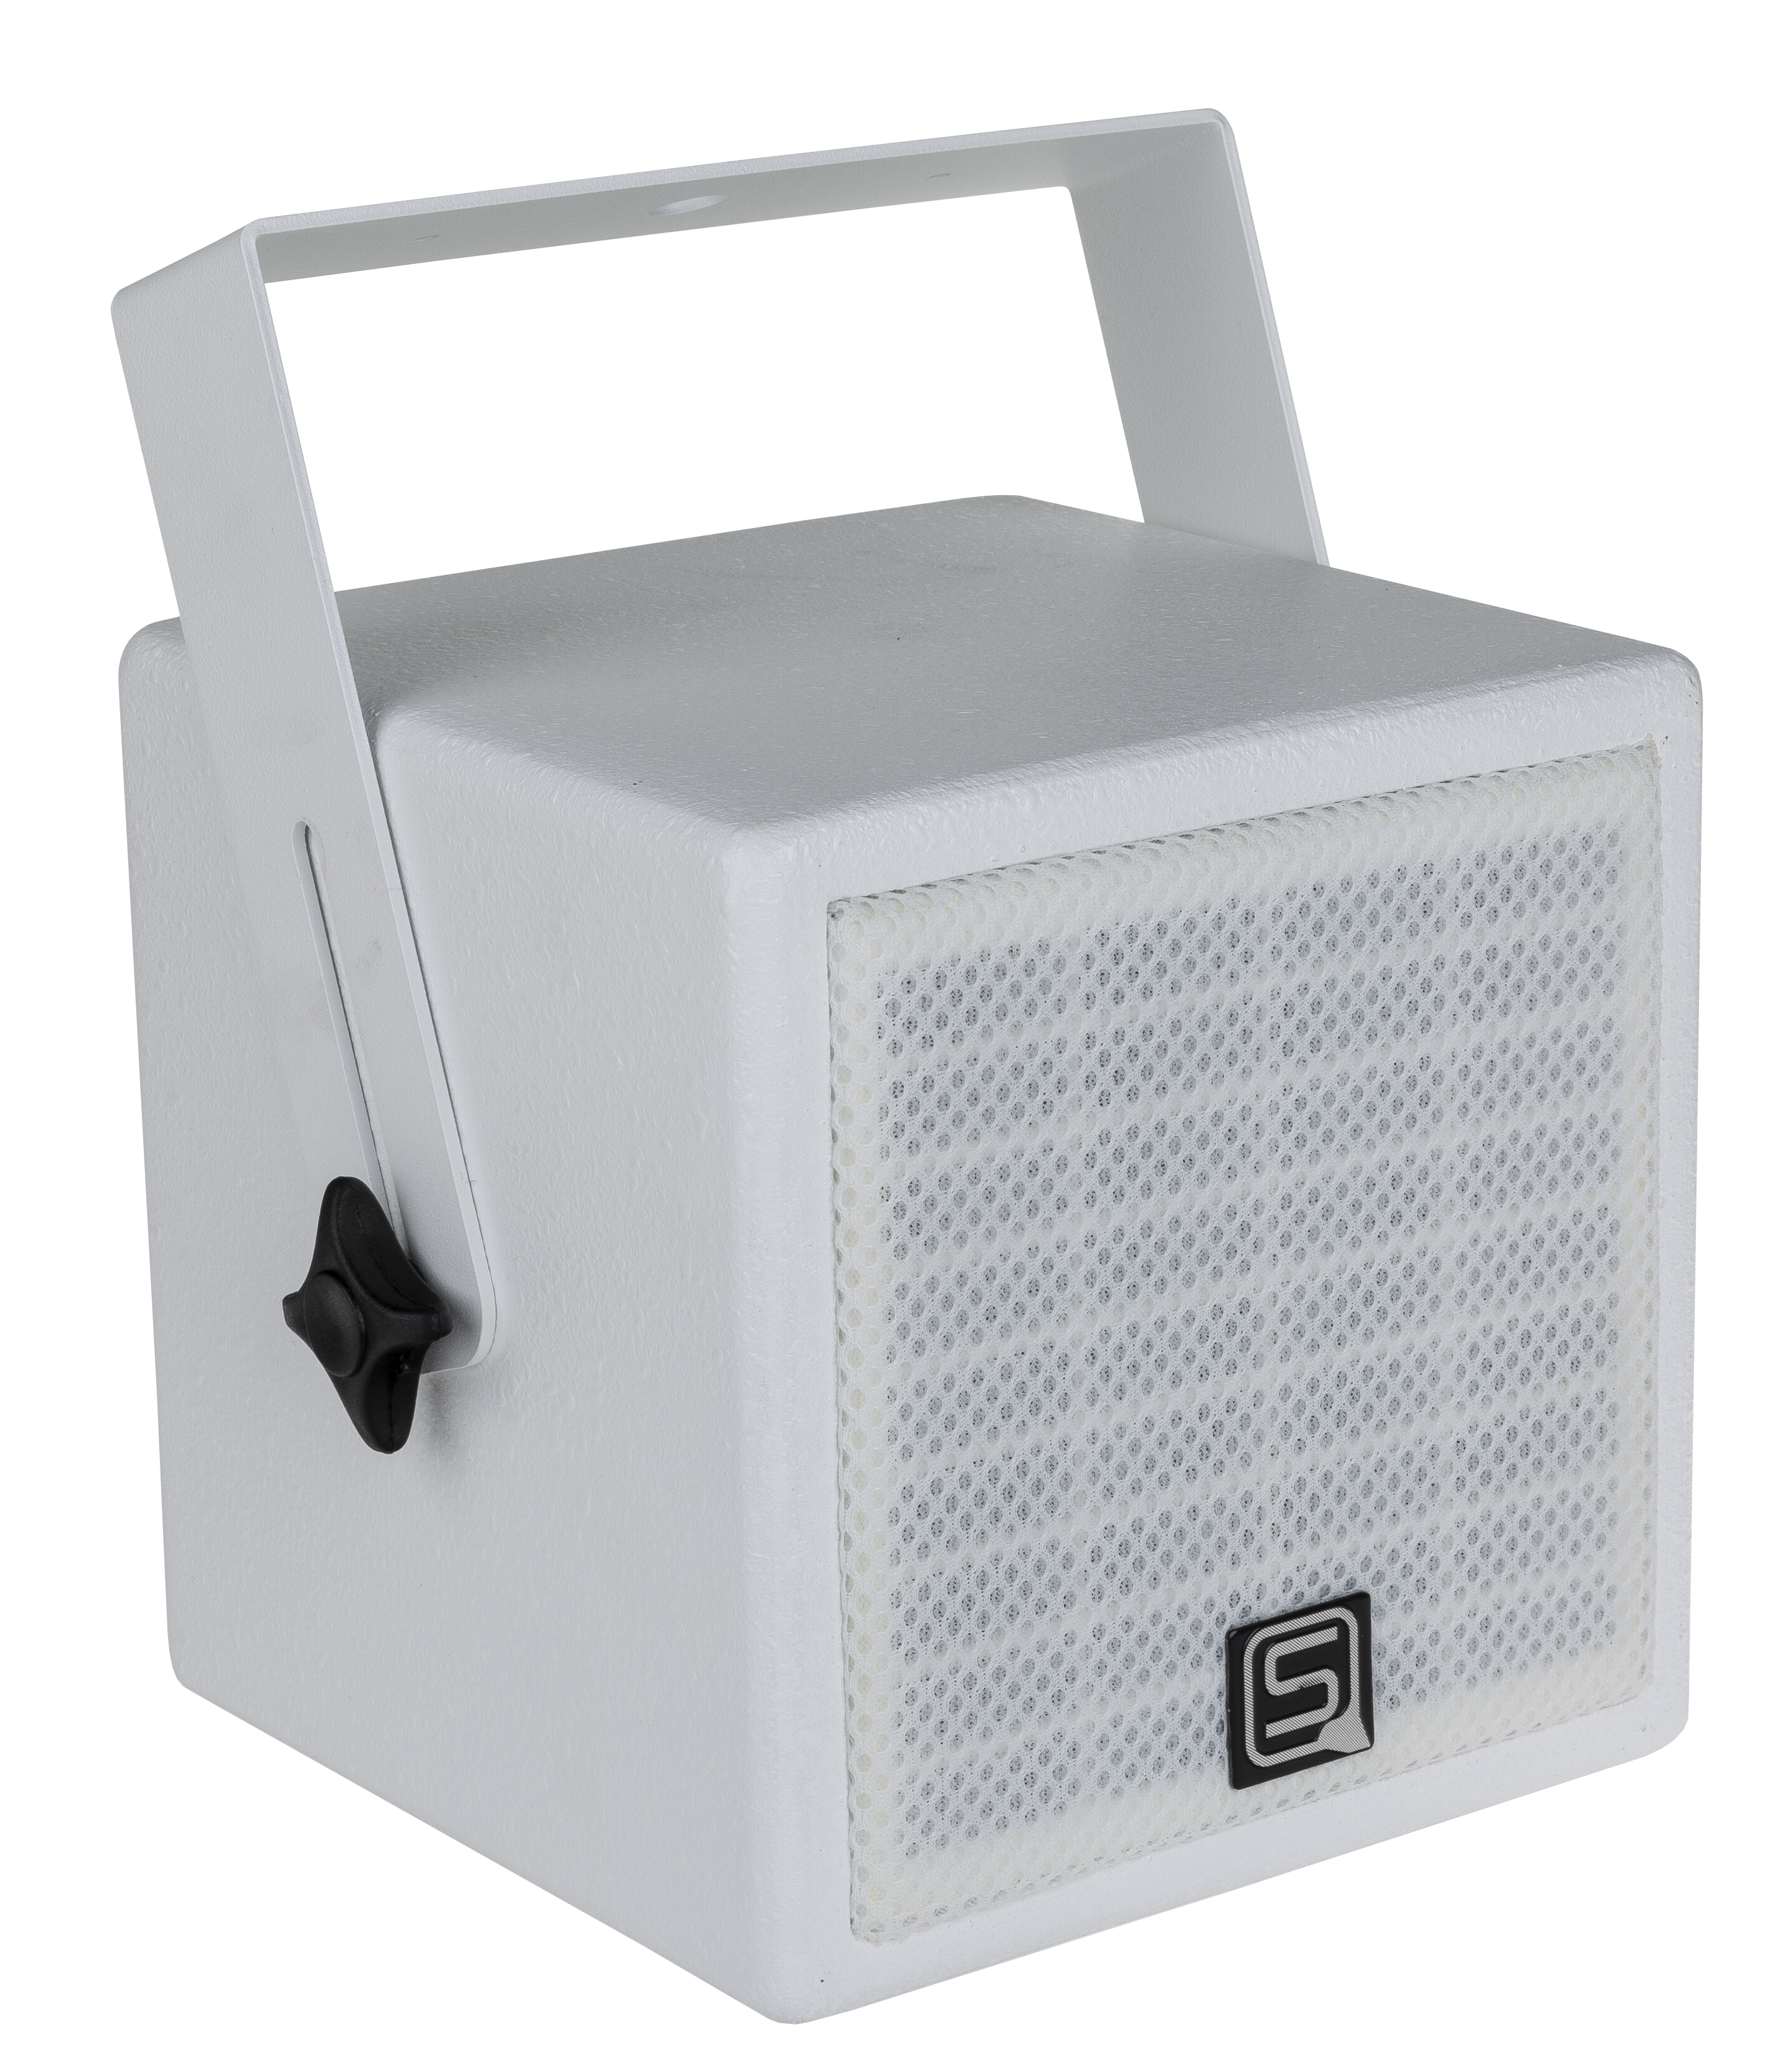 Small cube with 5" coaxial speaker - white finish